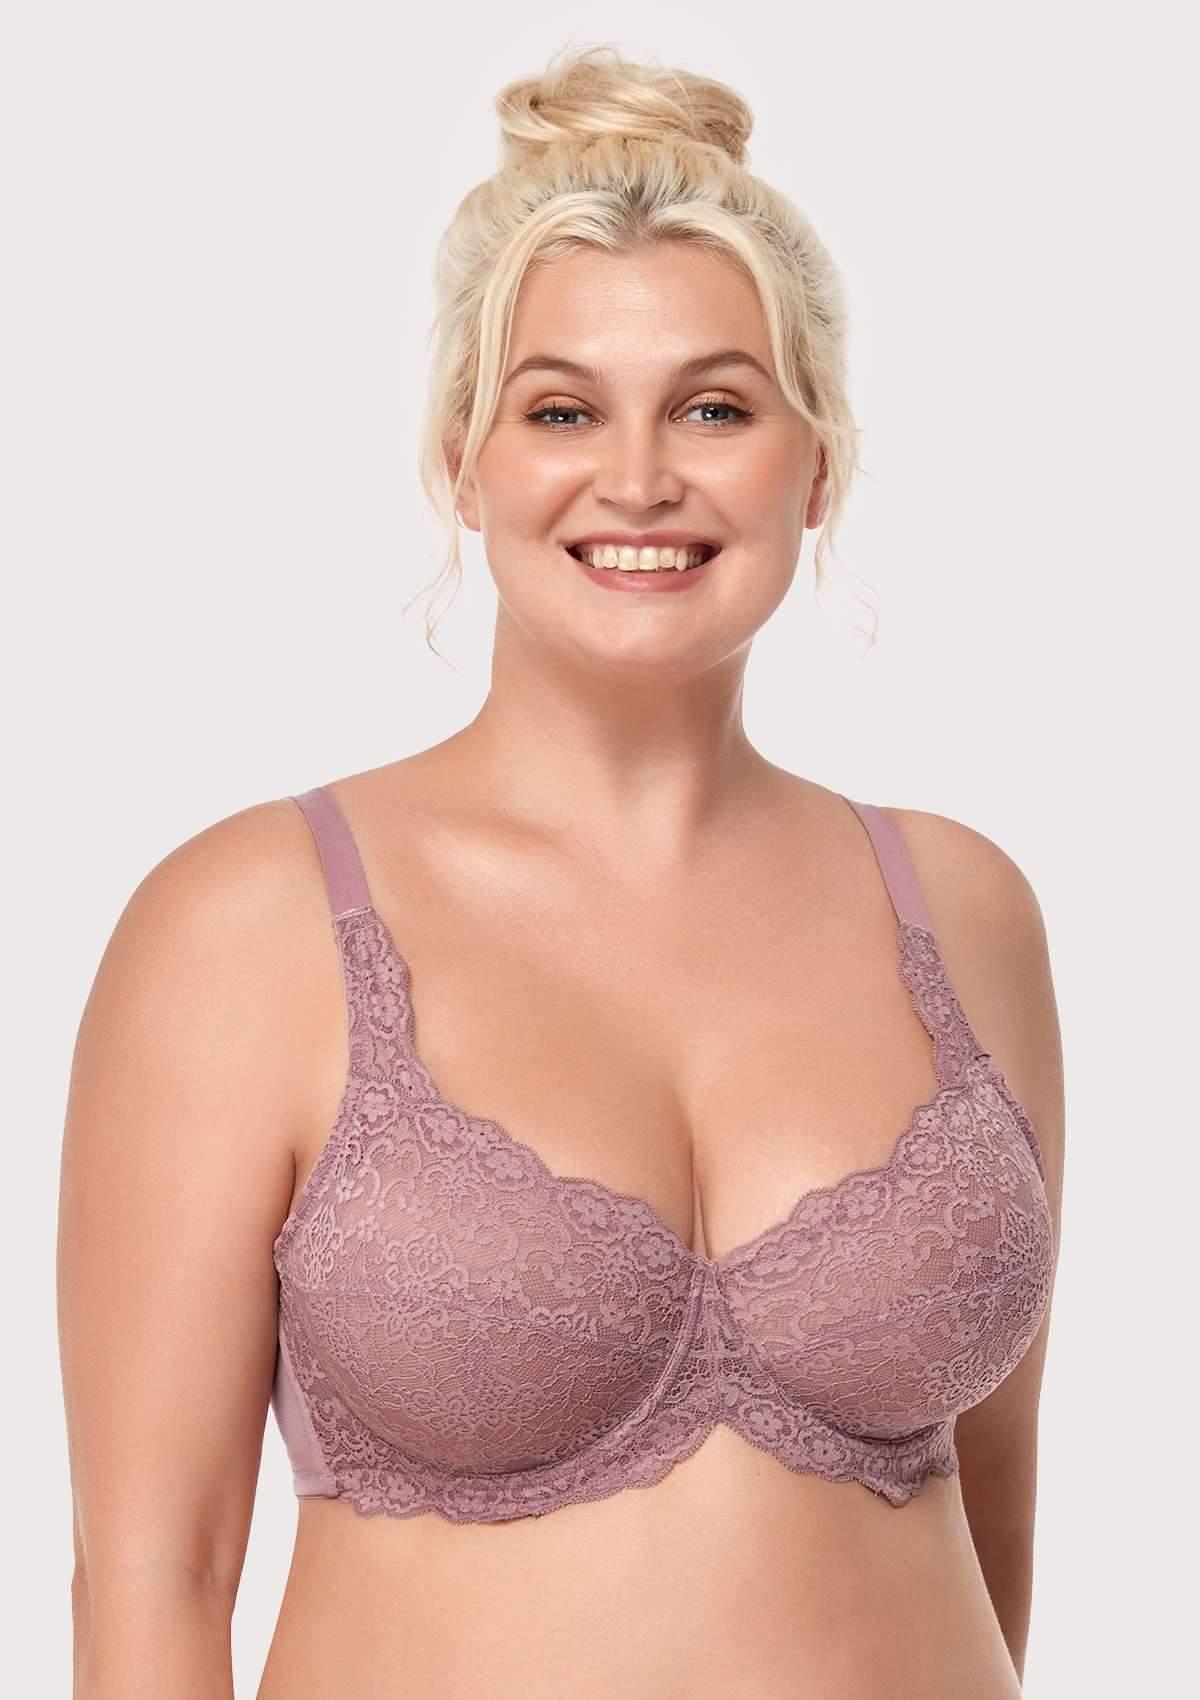 HSIA All-Over Floral Lace Unlined Bra: Minimizer Bra For Heavy Breasts - Purple / 36 / C